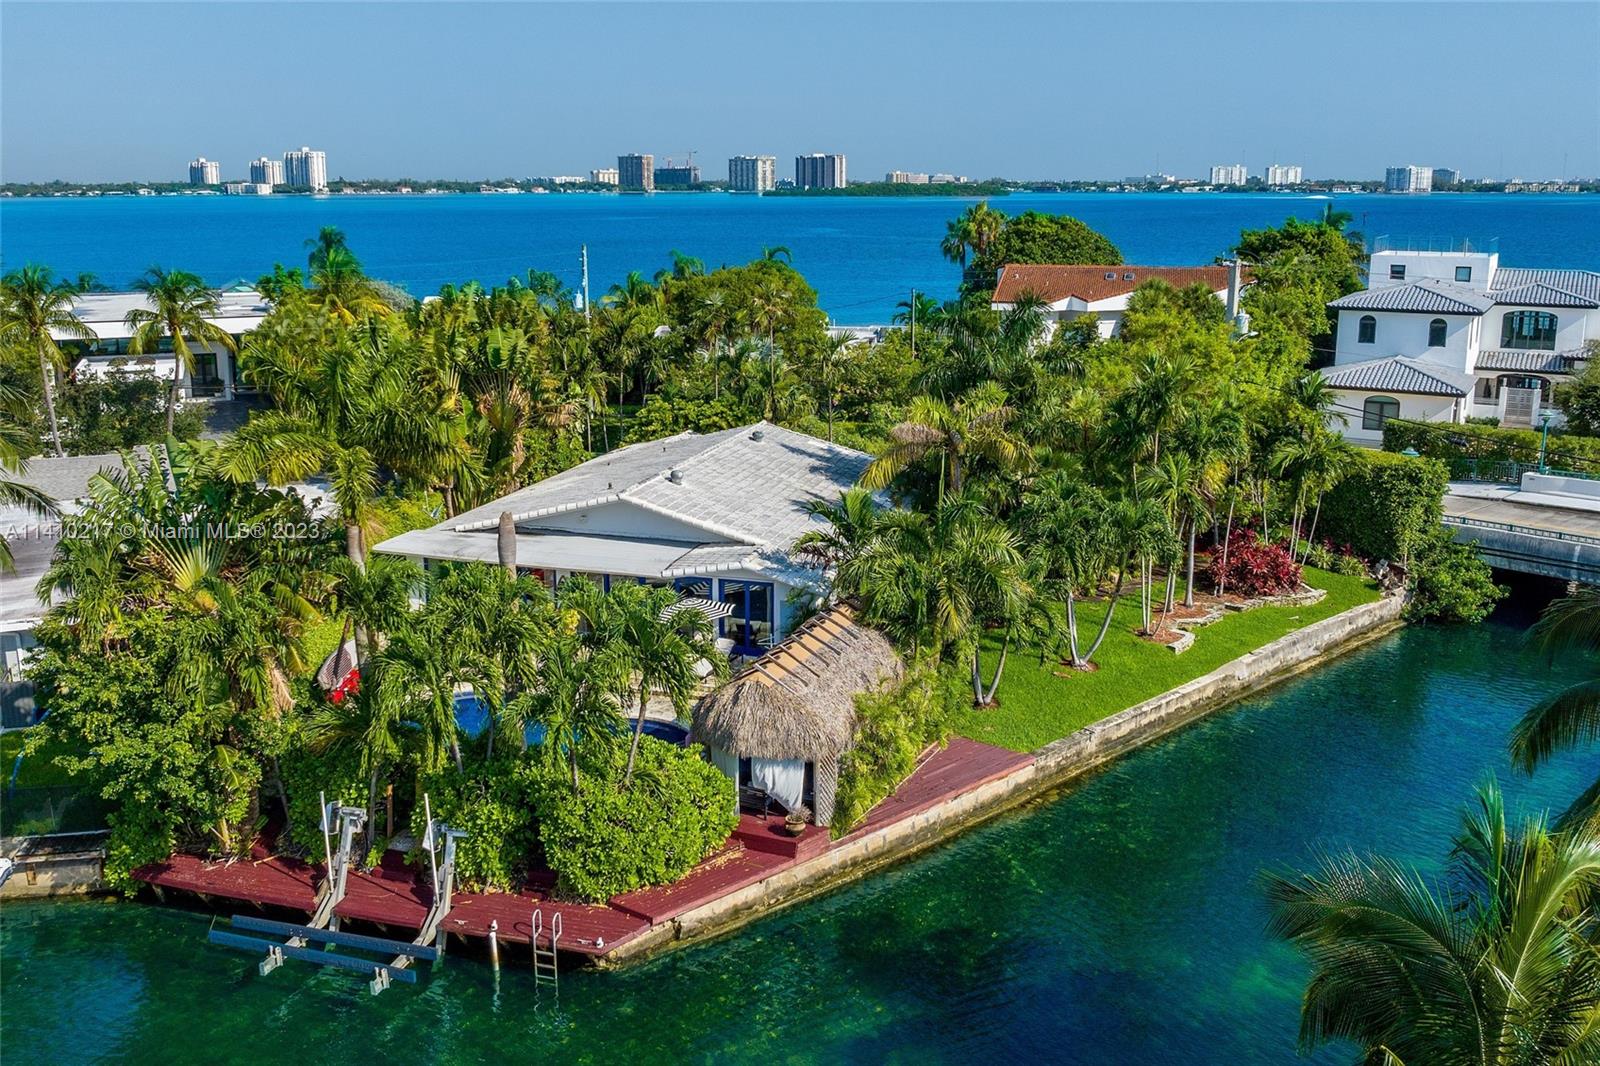 Discover a rare gem in Miami Beach’s exclusive Biscayne Point Island! This 3-bed/2-bath home offers 2,525 sqft of luxurious living. Set on a private, oversized corner lot, you’re surrounded by lush tropical foliage to maintain privacy. Enjoy immediate access to Biscayne Bay, with a dock and boat lift. Outside, an outdoor oasis awaits with a heated pool, wet bar, tiki hut, Argentine grill, and inviting patios. Inside, a spacious floor plan with an open kitchen and ample living areas. The master suite overlooks the pool, with a Moroccan sauna tub adding a touch of elegance to the space. Minutes from SoBe and Bal Harbour, this exclusive property is a must-see.